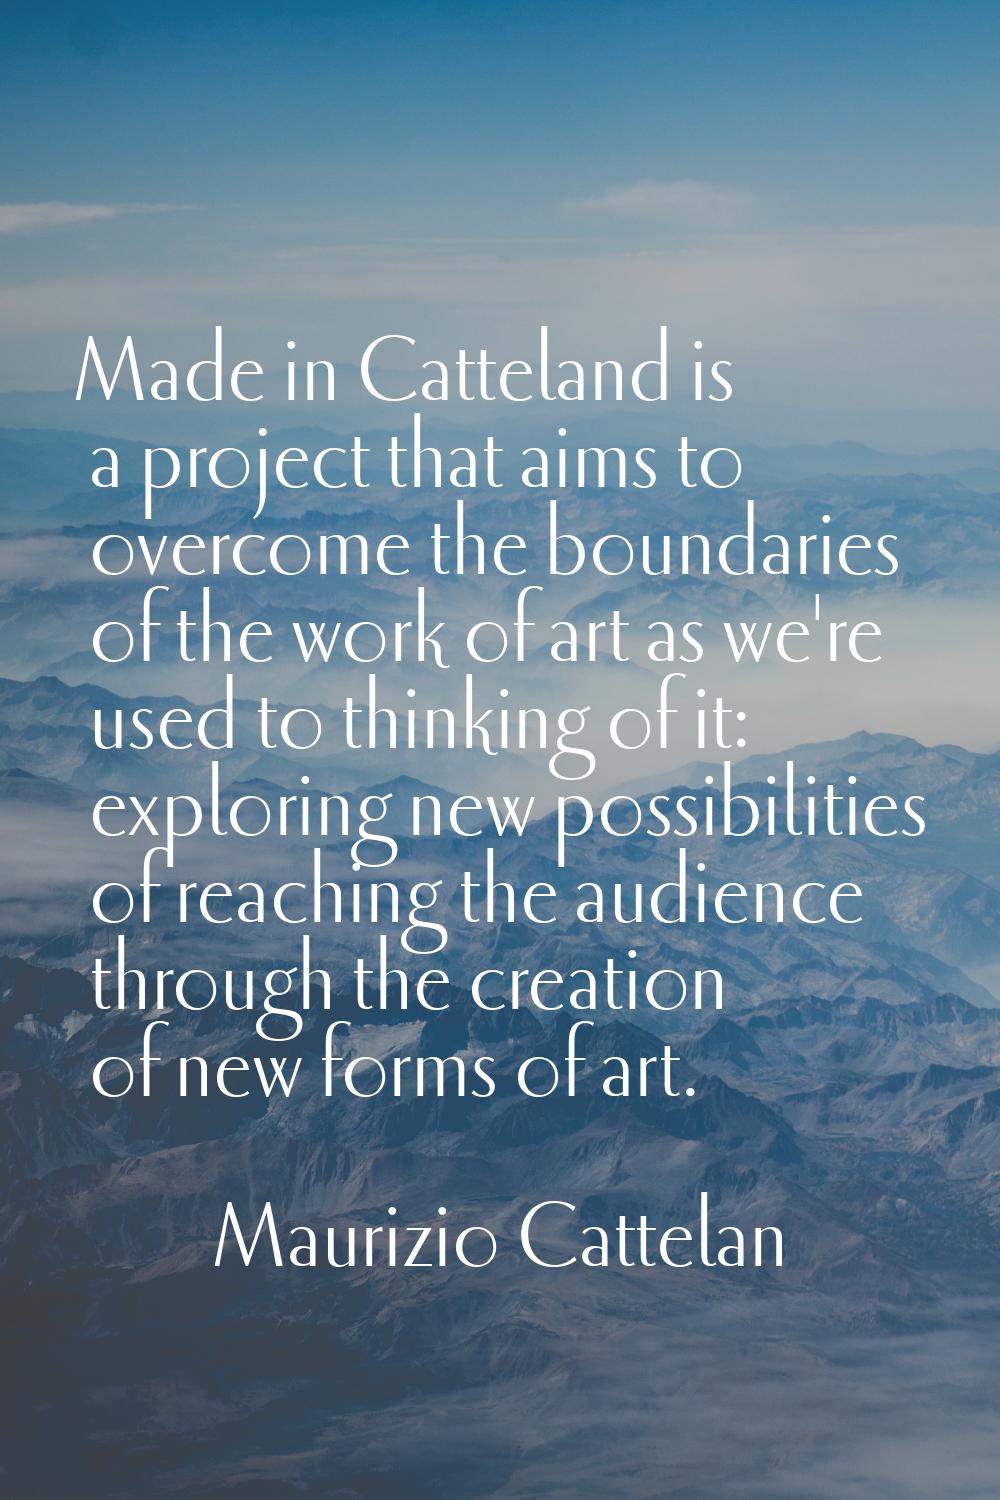 Made in Catteland is a project that aims to overcome the boundaries of the work of art as we're use